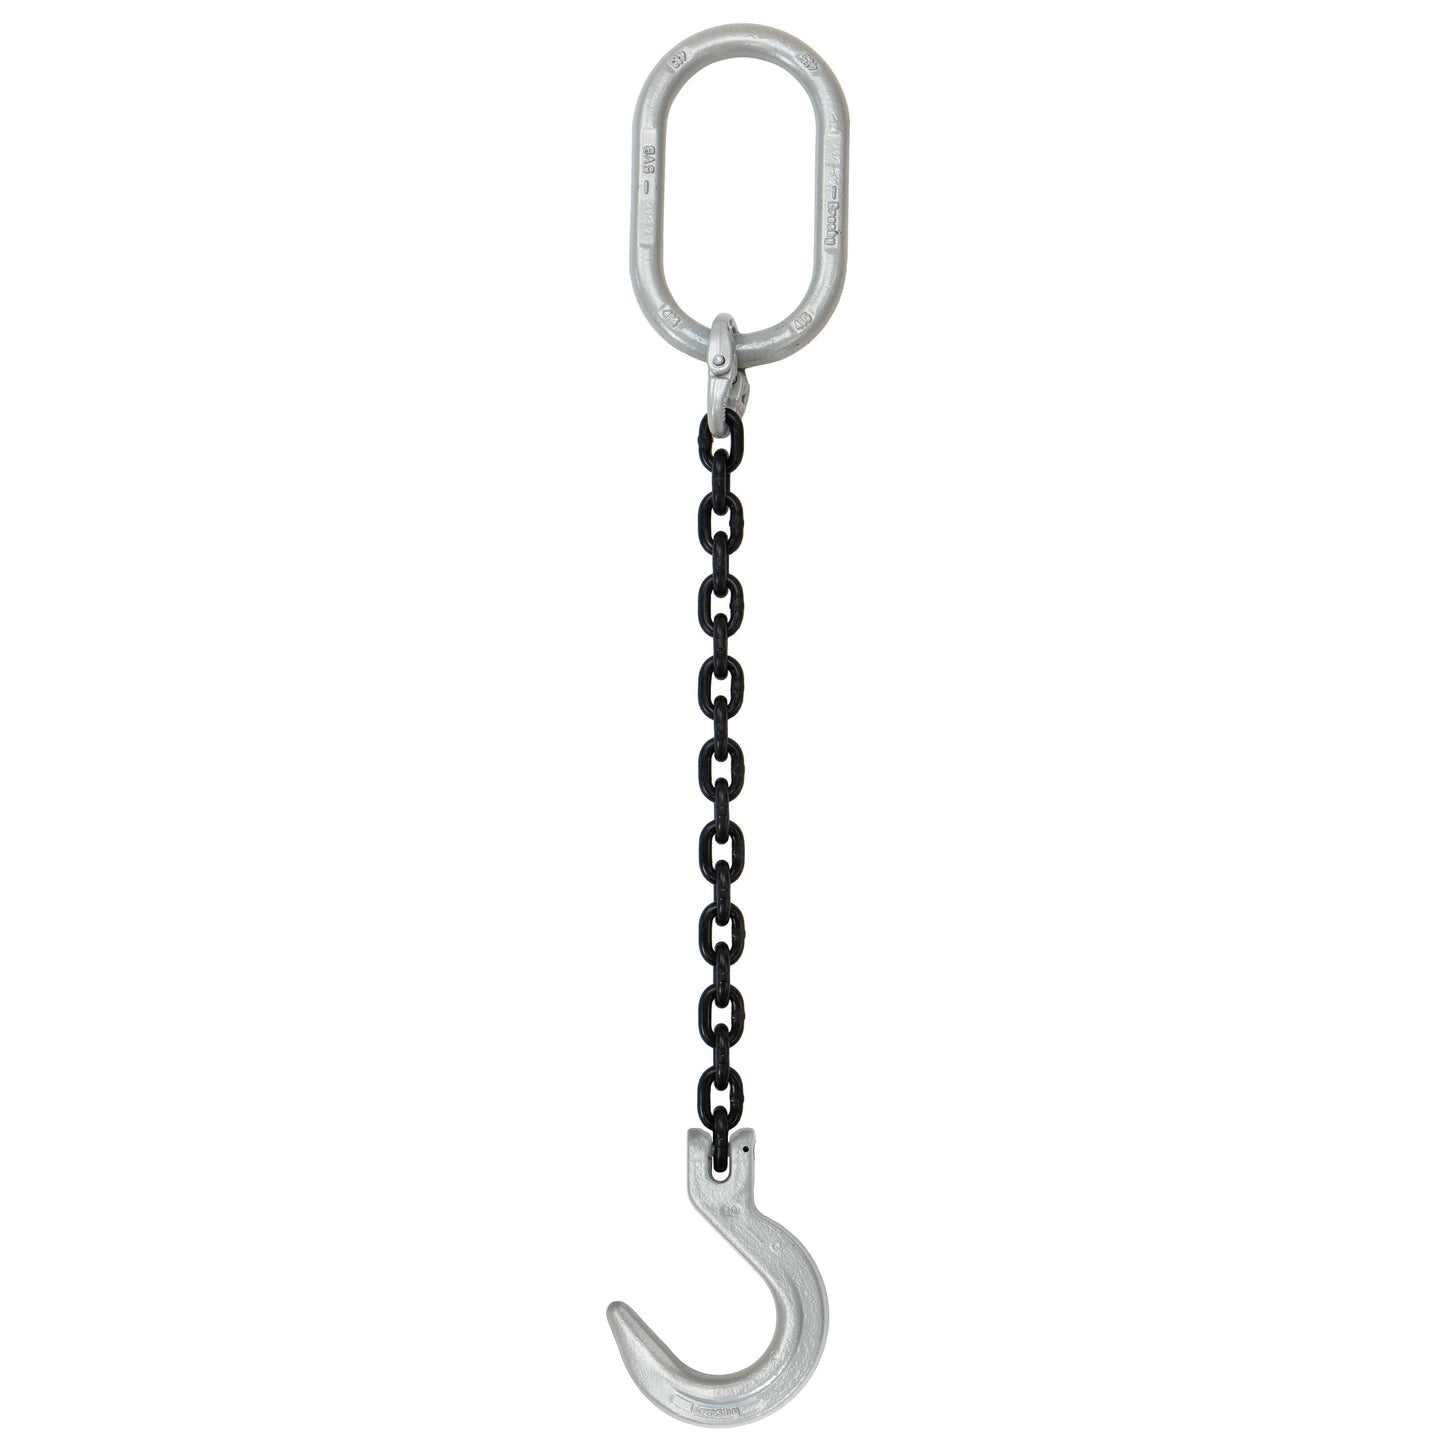 38 inch x 18 foot Domestic Single Leg Chain Sling w Crosby Foundry Hook Grade 100 image 1 of 2